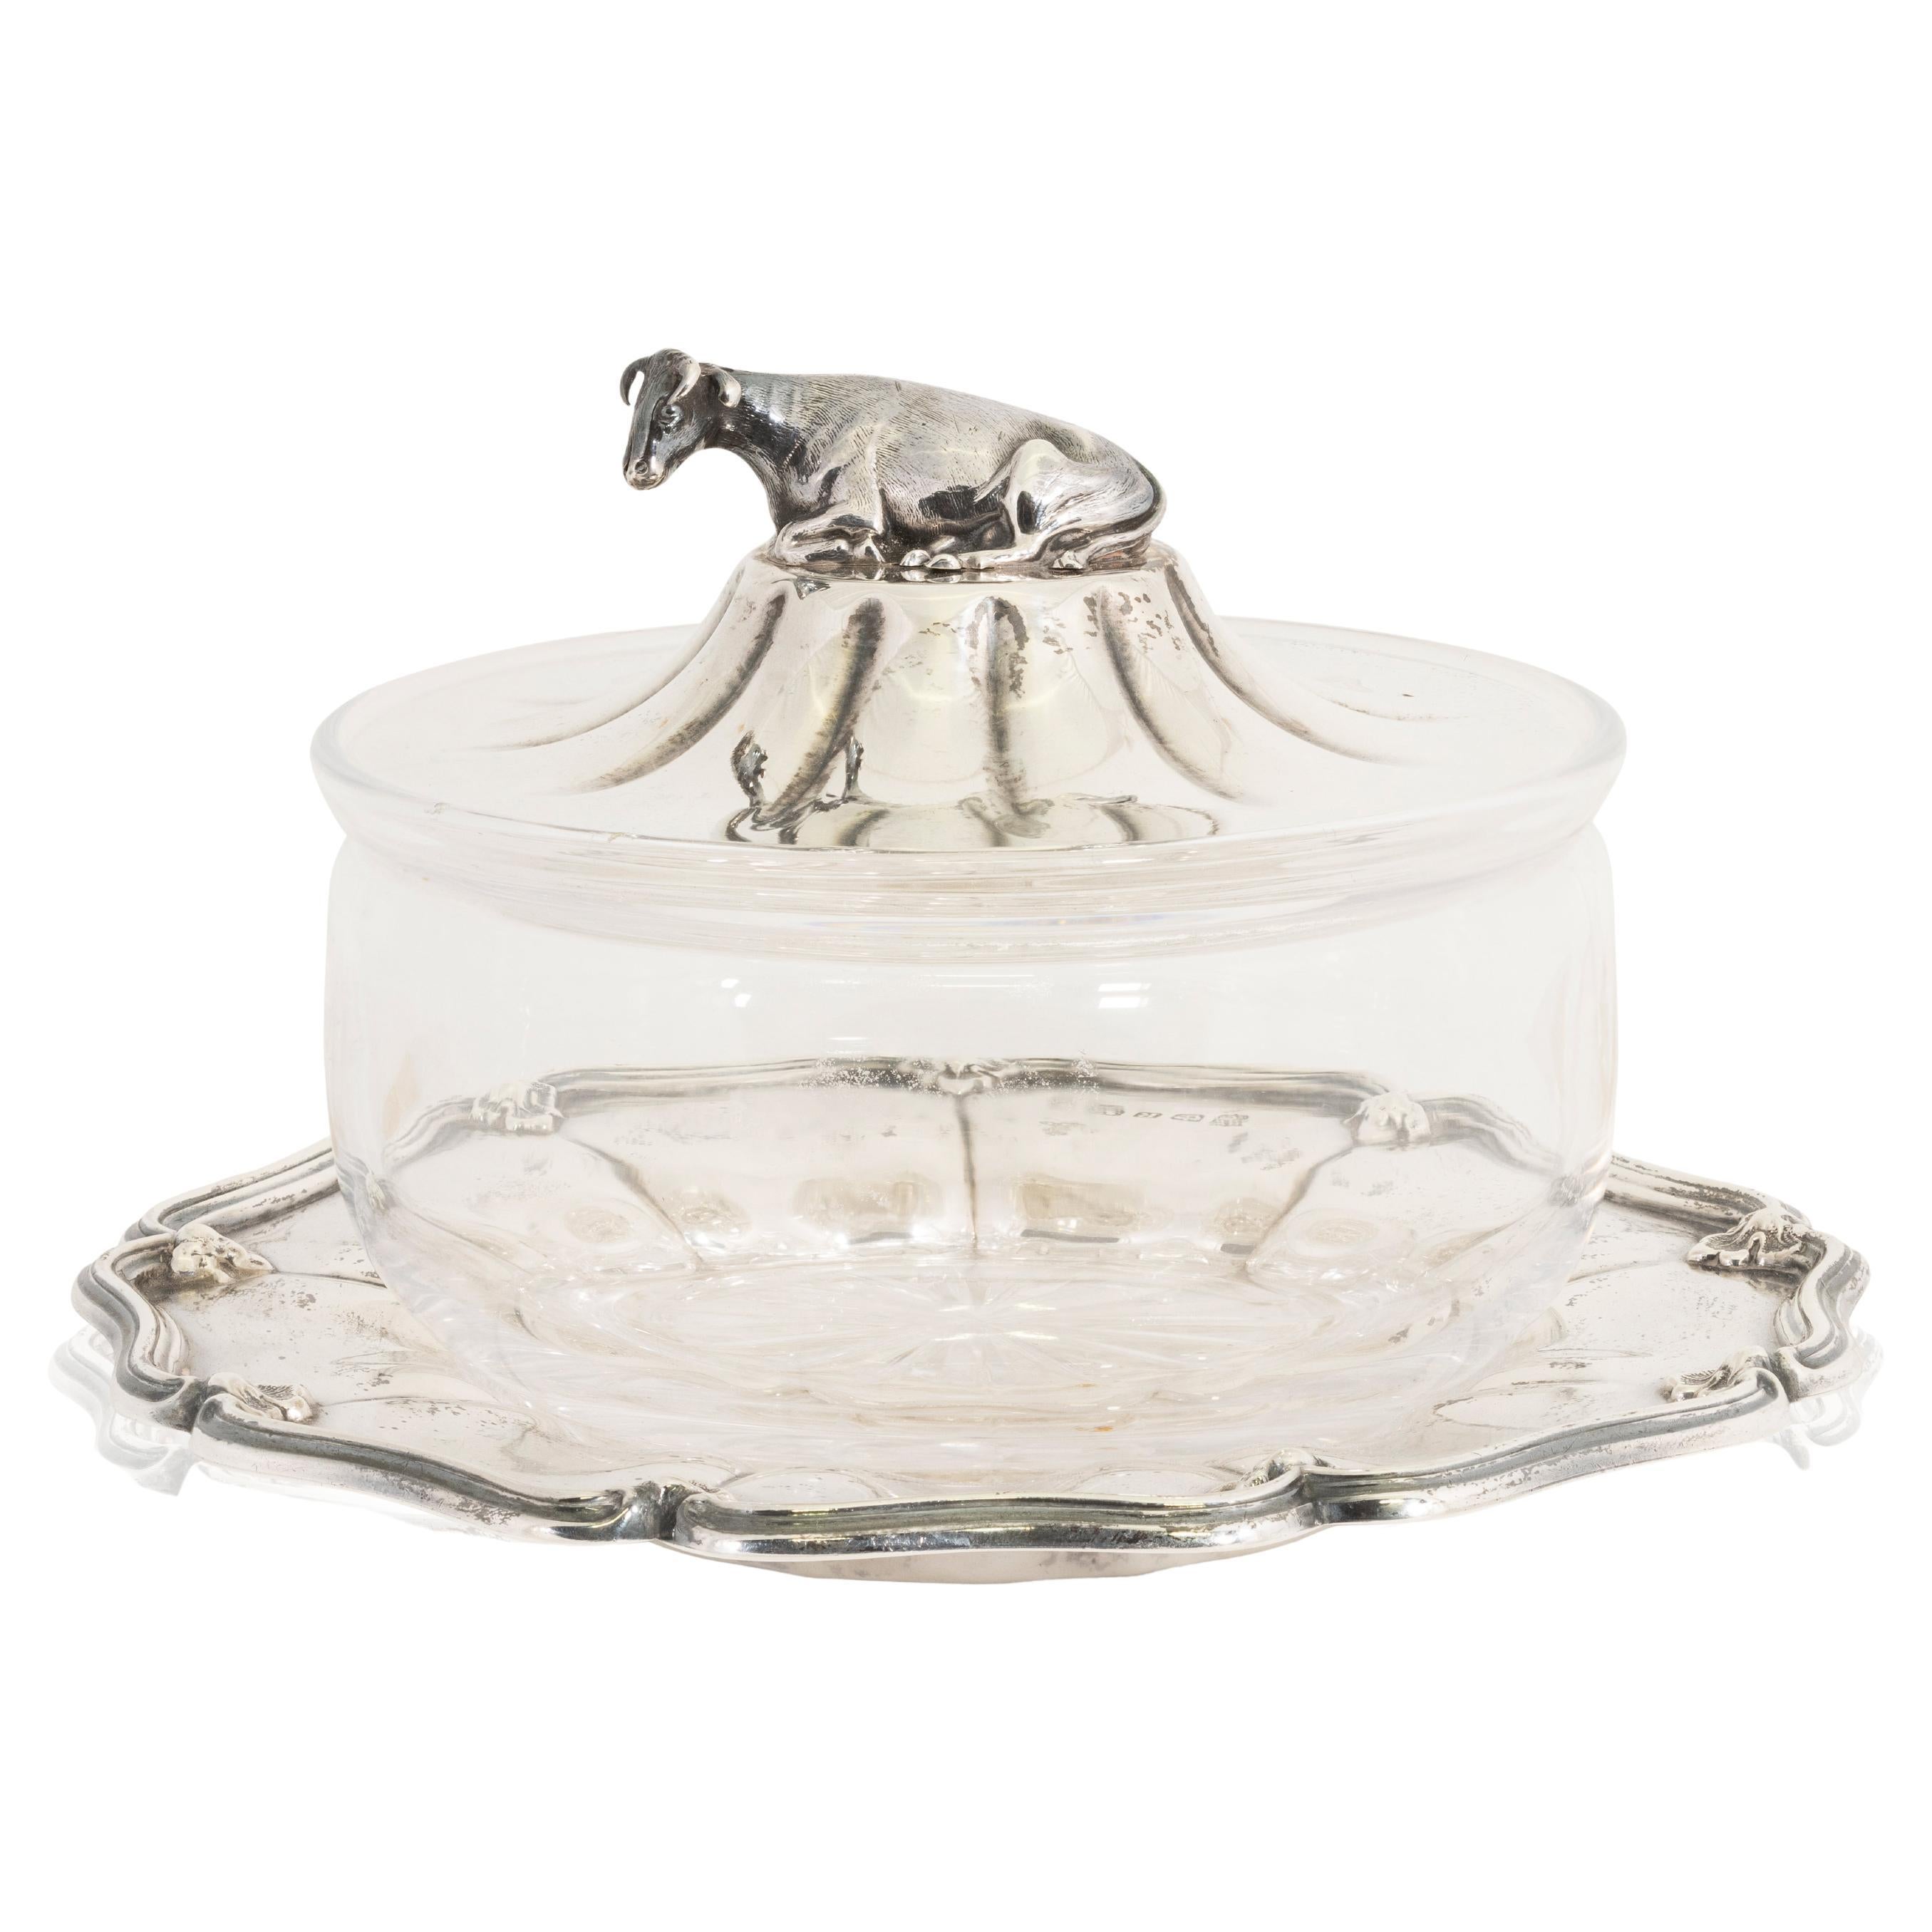 19th Century Sterling Silver Butter Dish with Cow Finial